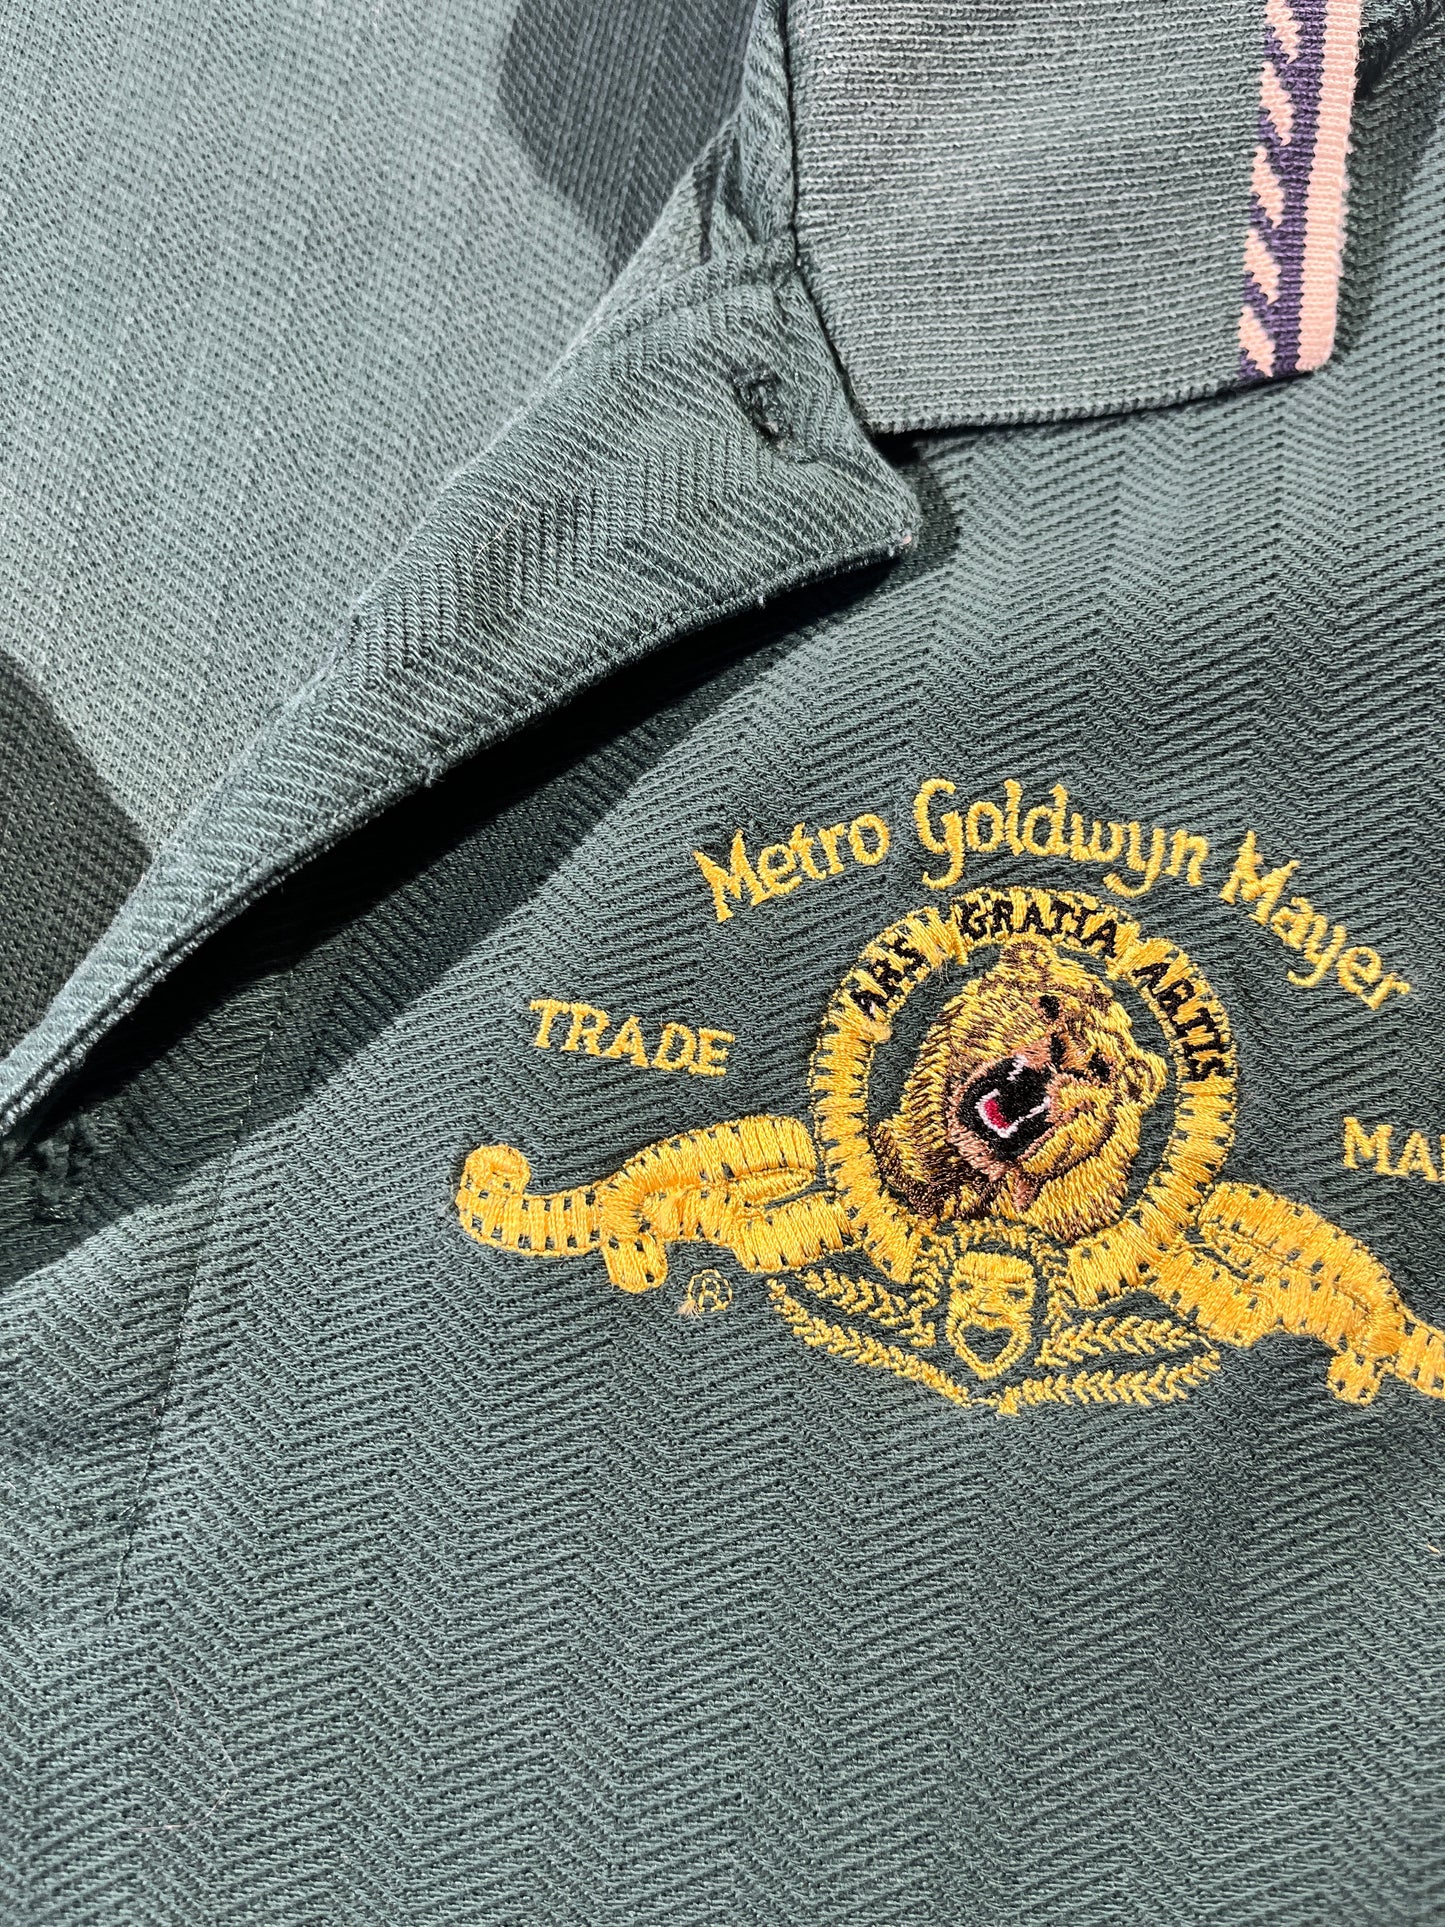 Vintage Lion Polo Shirt Movies Metro Goldwyn Mayer Embroidered Top